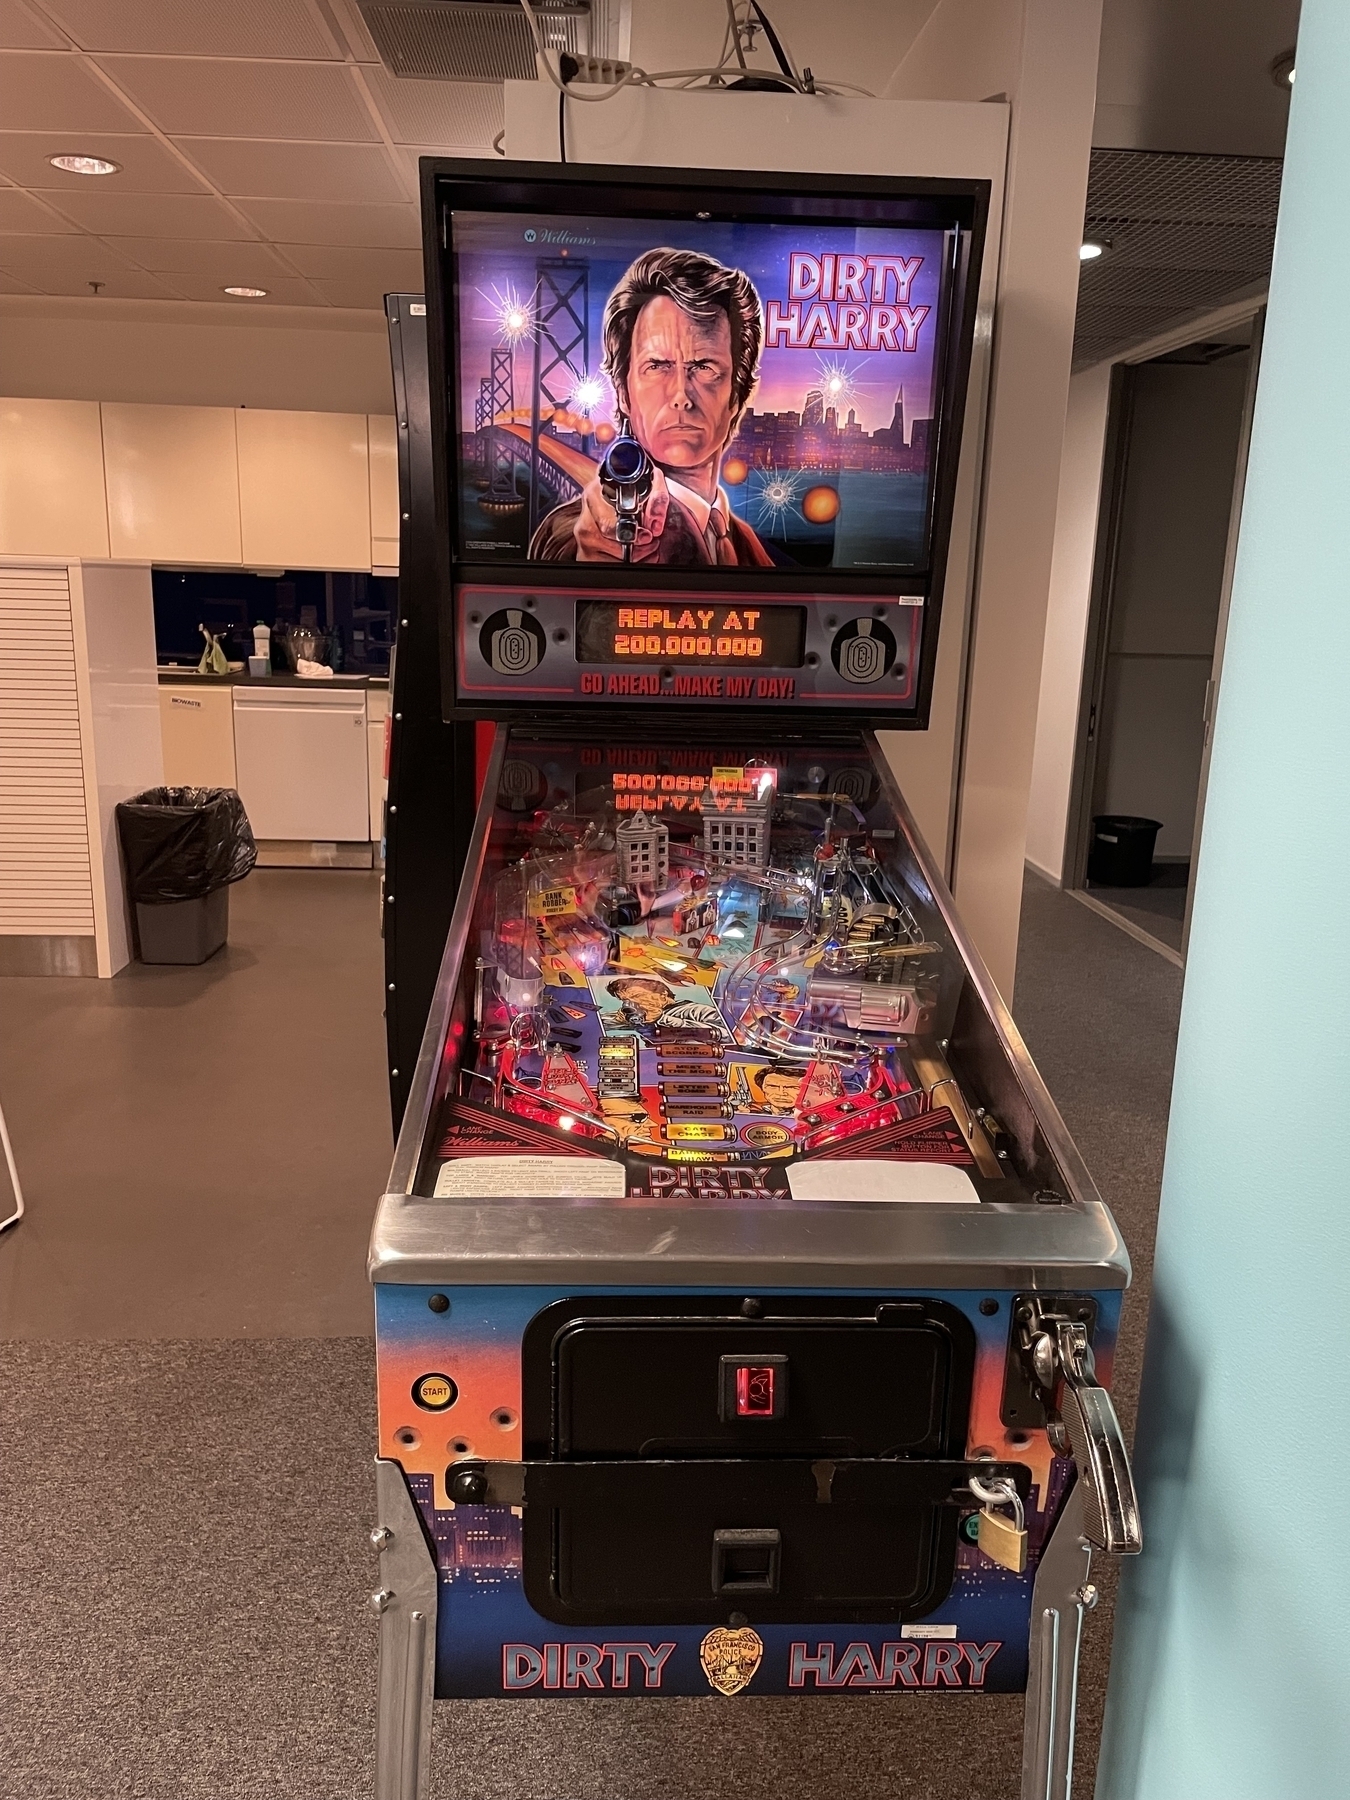 A “Dirty Harry” pinball machine in an office environment 